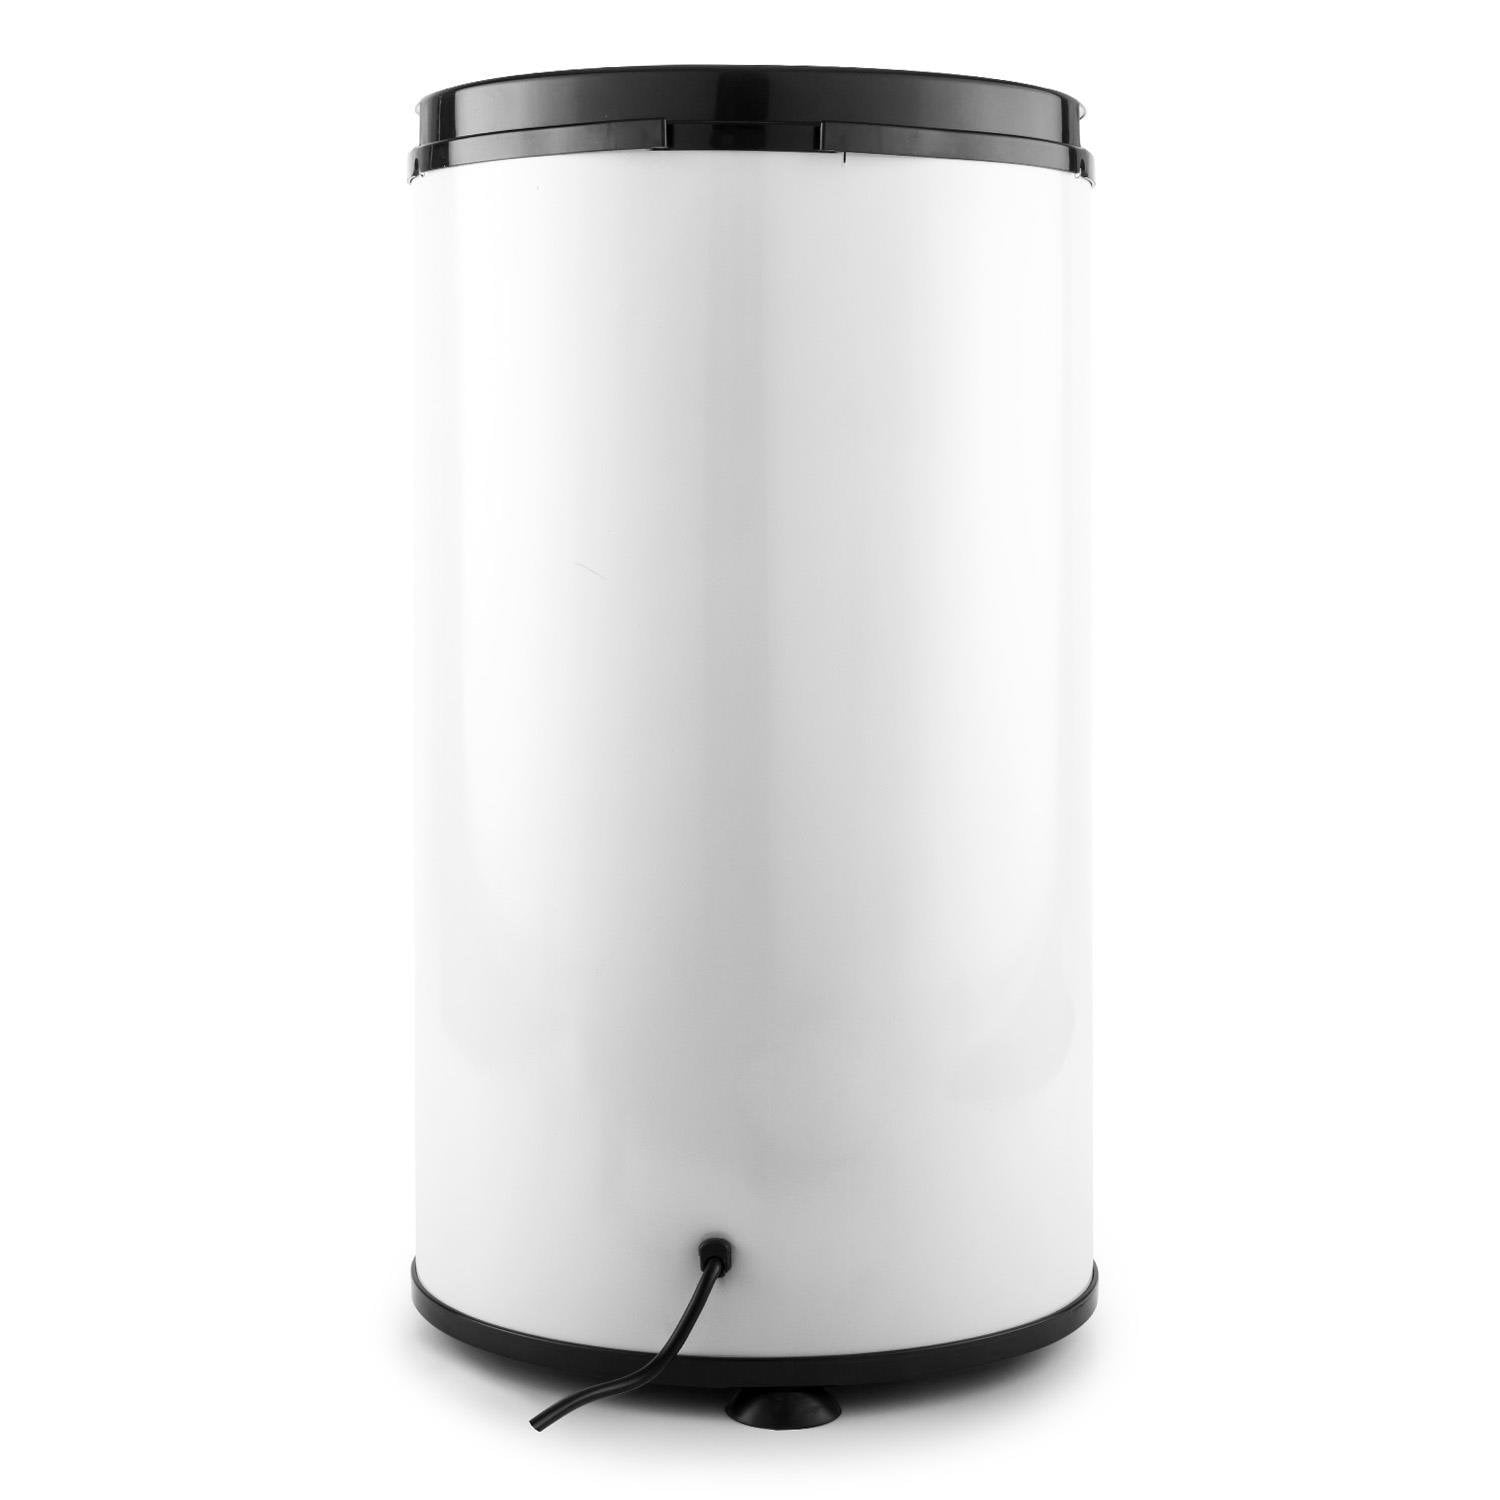 Used Panda 3200rpm Portable Spin Dryer 110V/22lb Stainless Steel